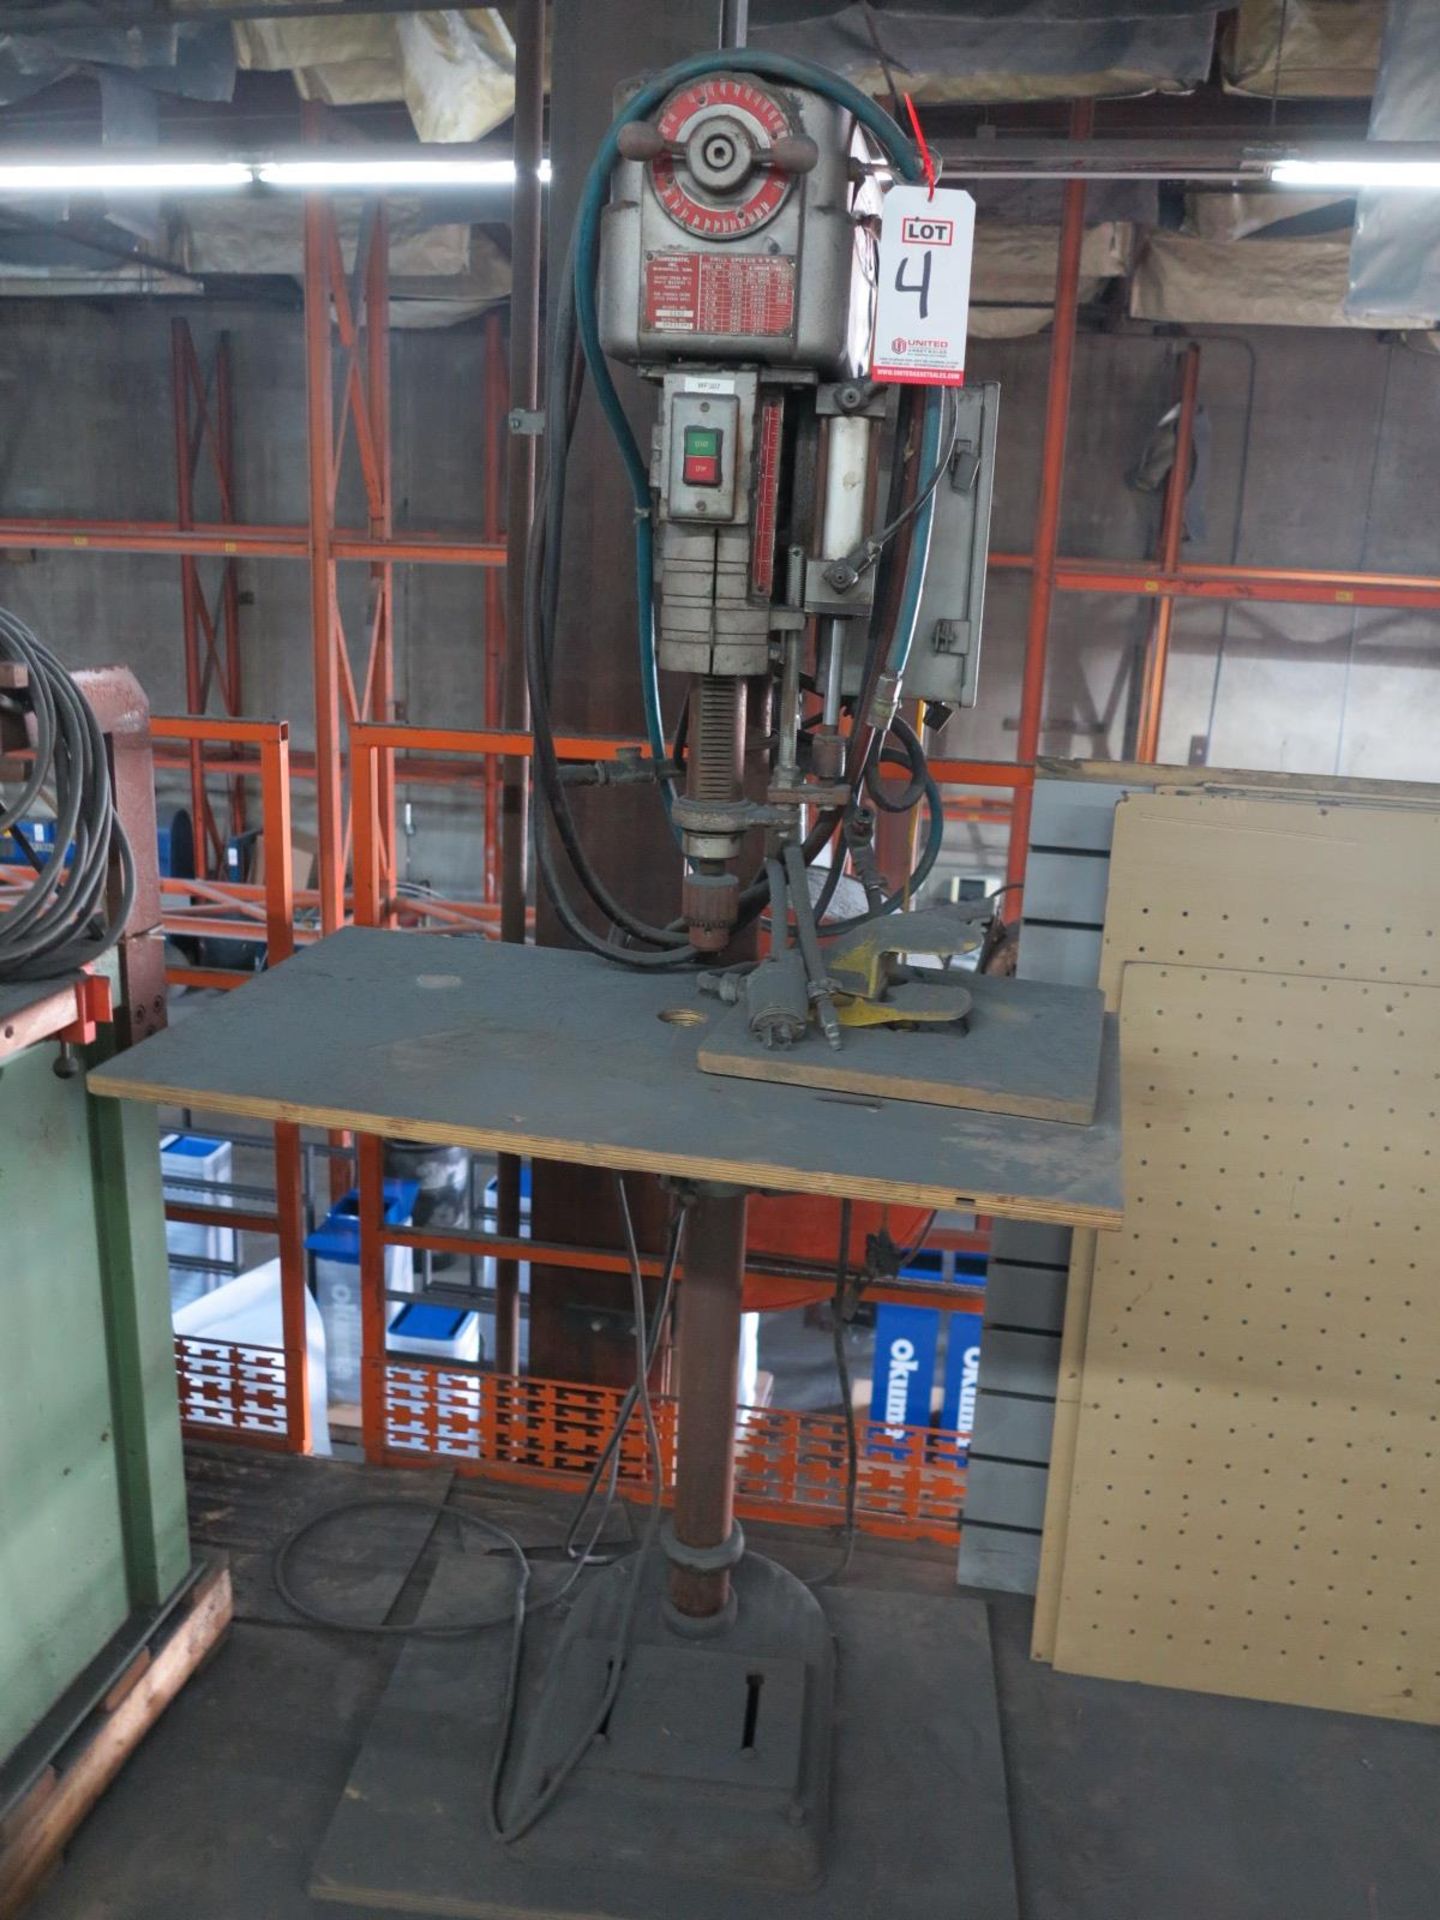 POWERMATIC MODEL 1150 15" DRILL PRESS, VARIABLE SPEED, S/N 4-4359-1, OUT OF SERVICE - Image 2 of 2